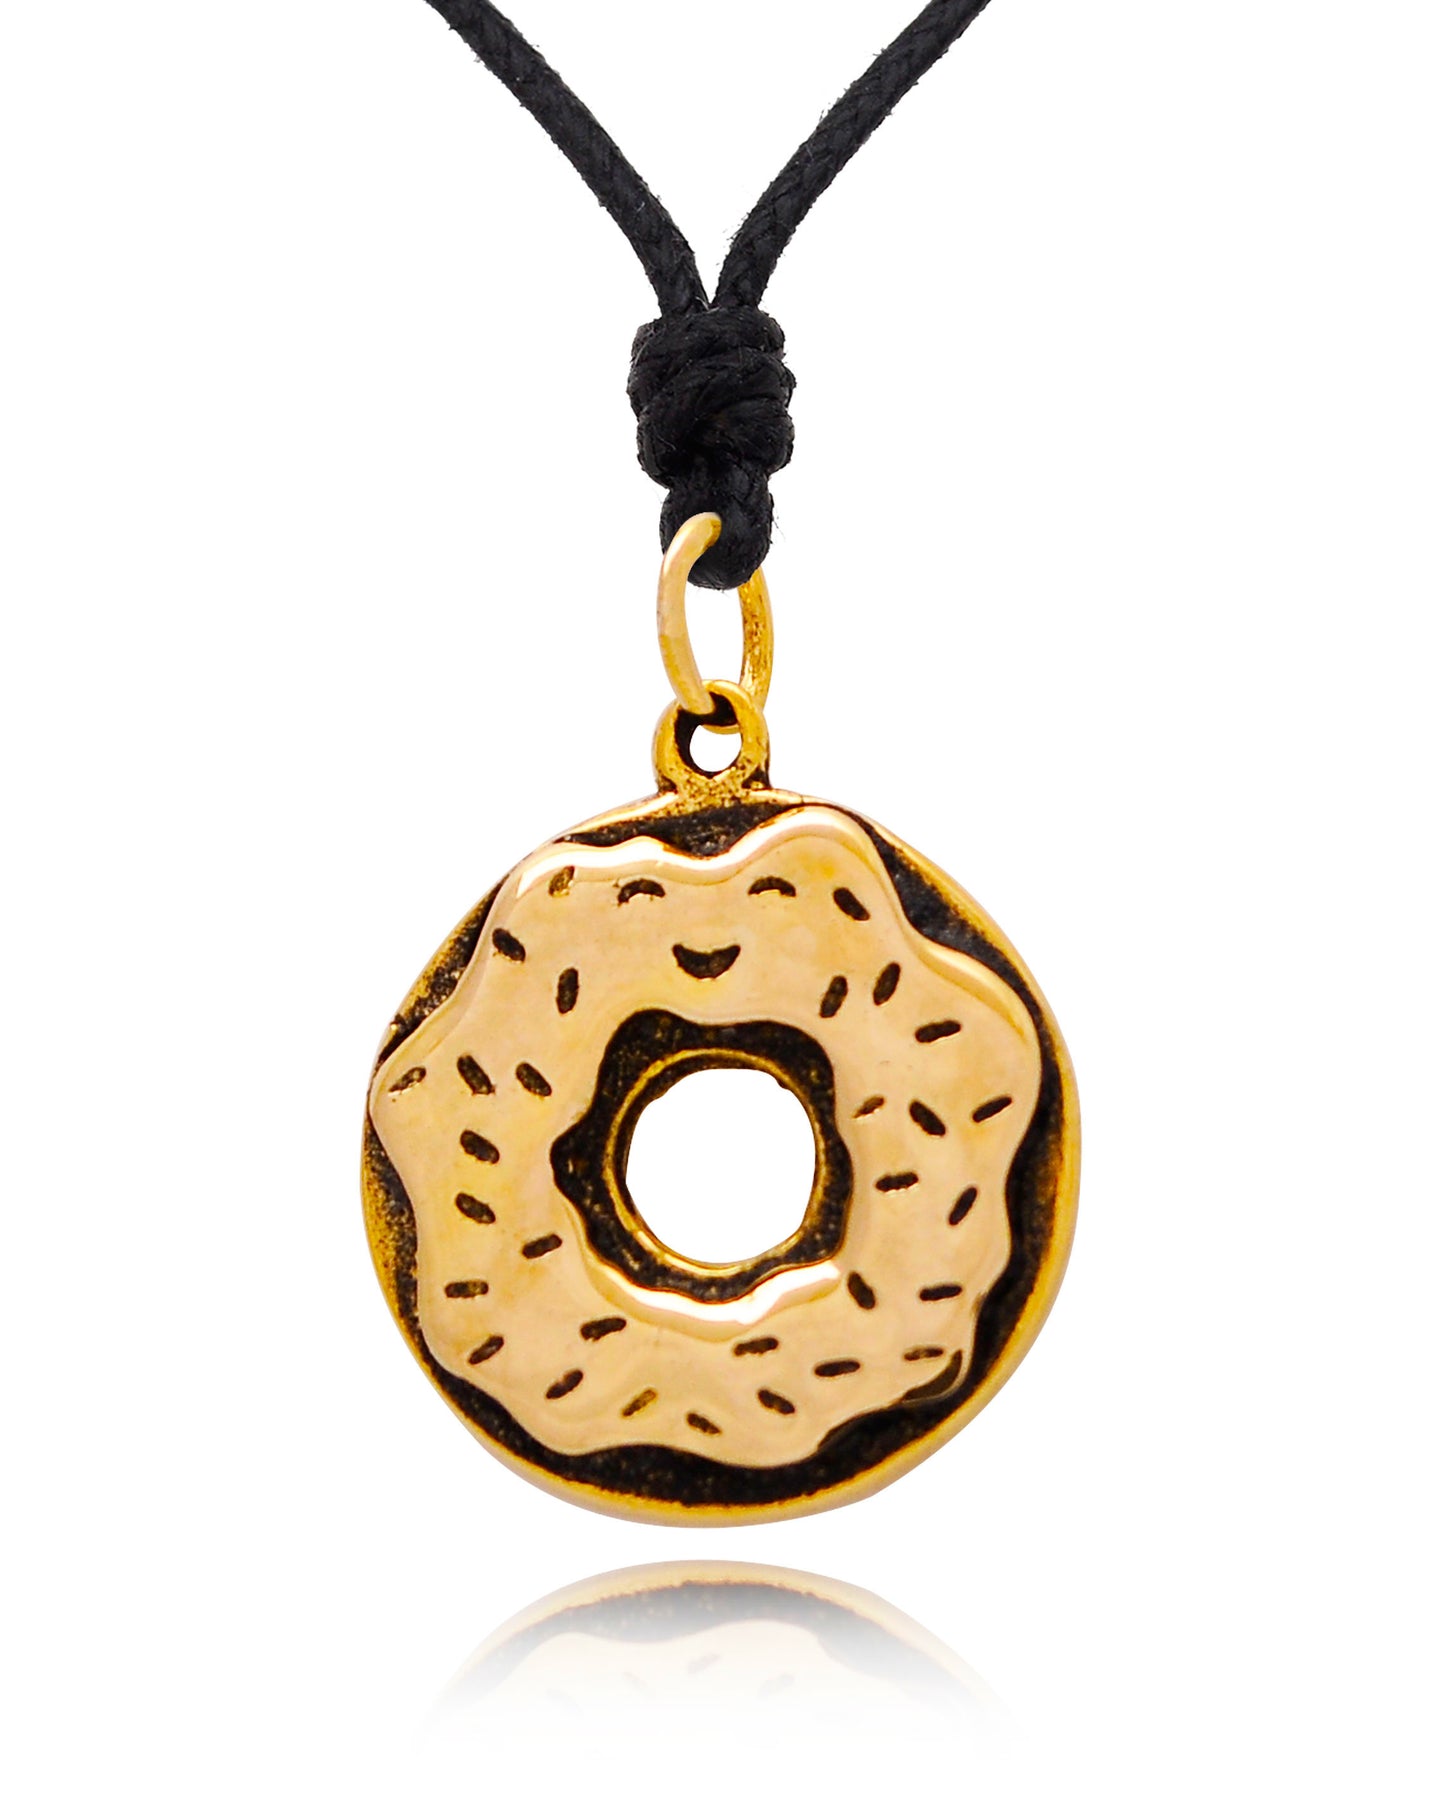 Sweet Donut Silver Pewter Gold BrassCharm Necklace Pendant Jewelry